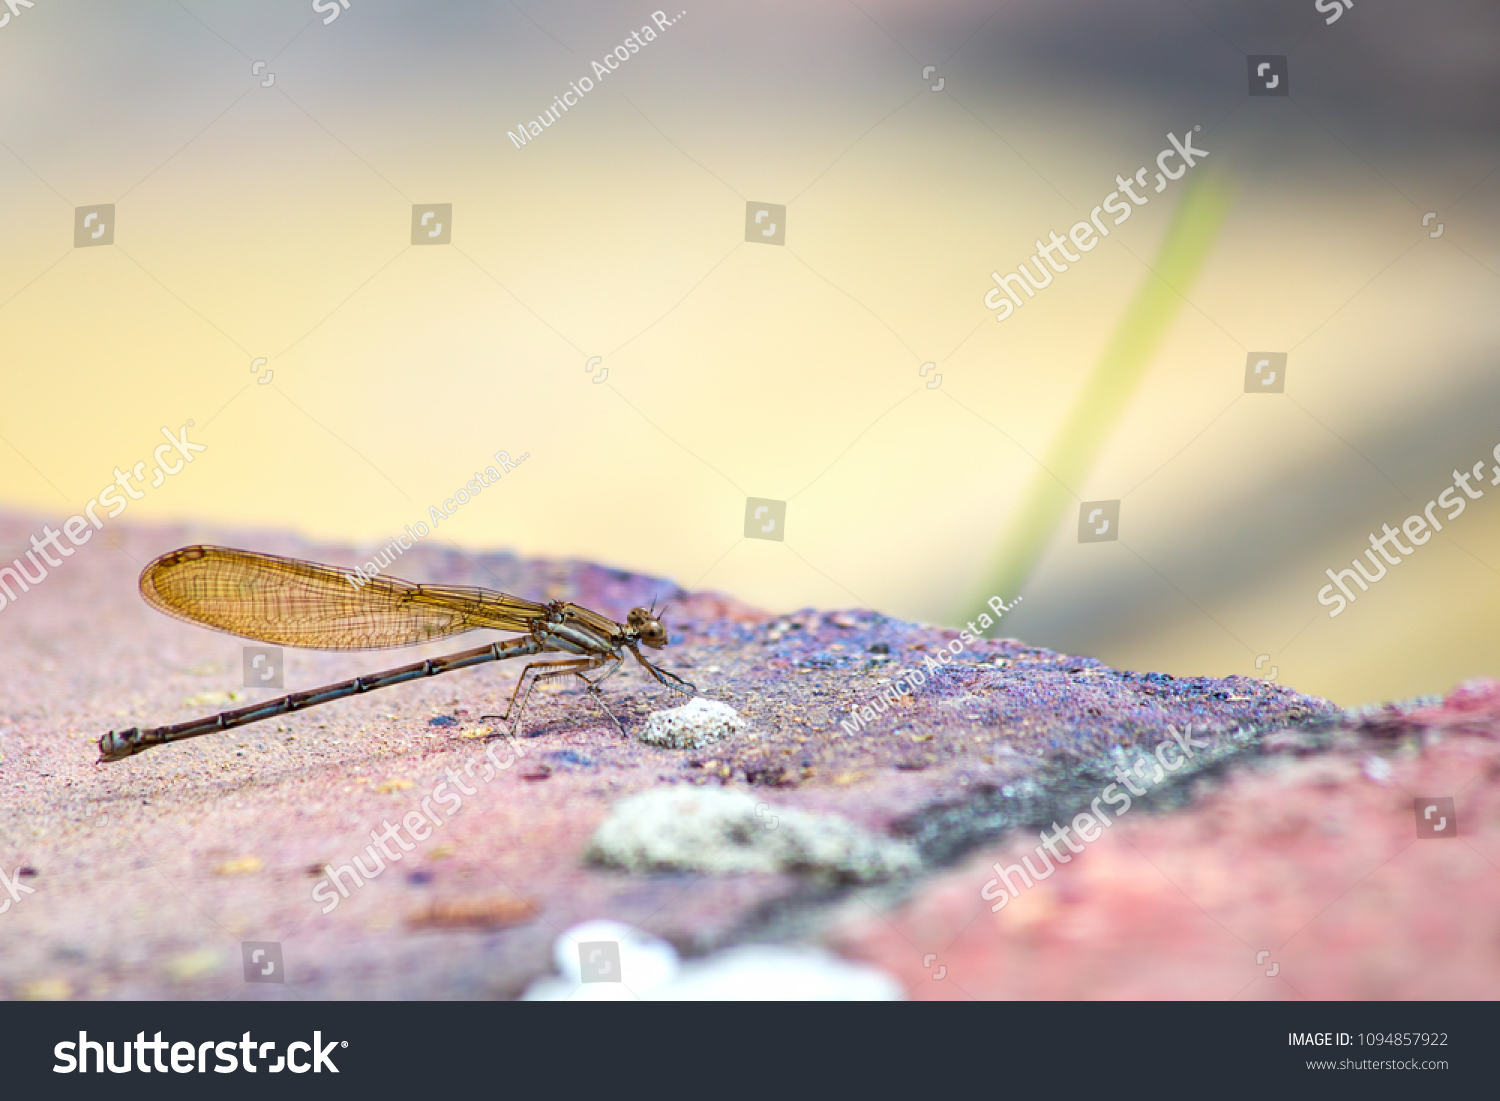 Macro photography of a golden damselfly sitting on a red brick. Captured at the Andean mountains of central Colombia. #1094857922